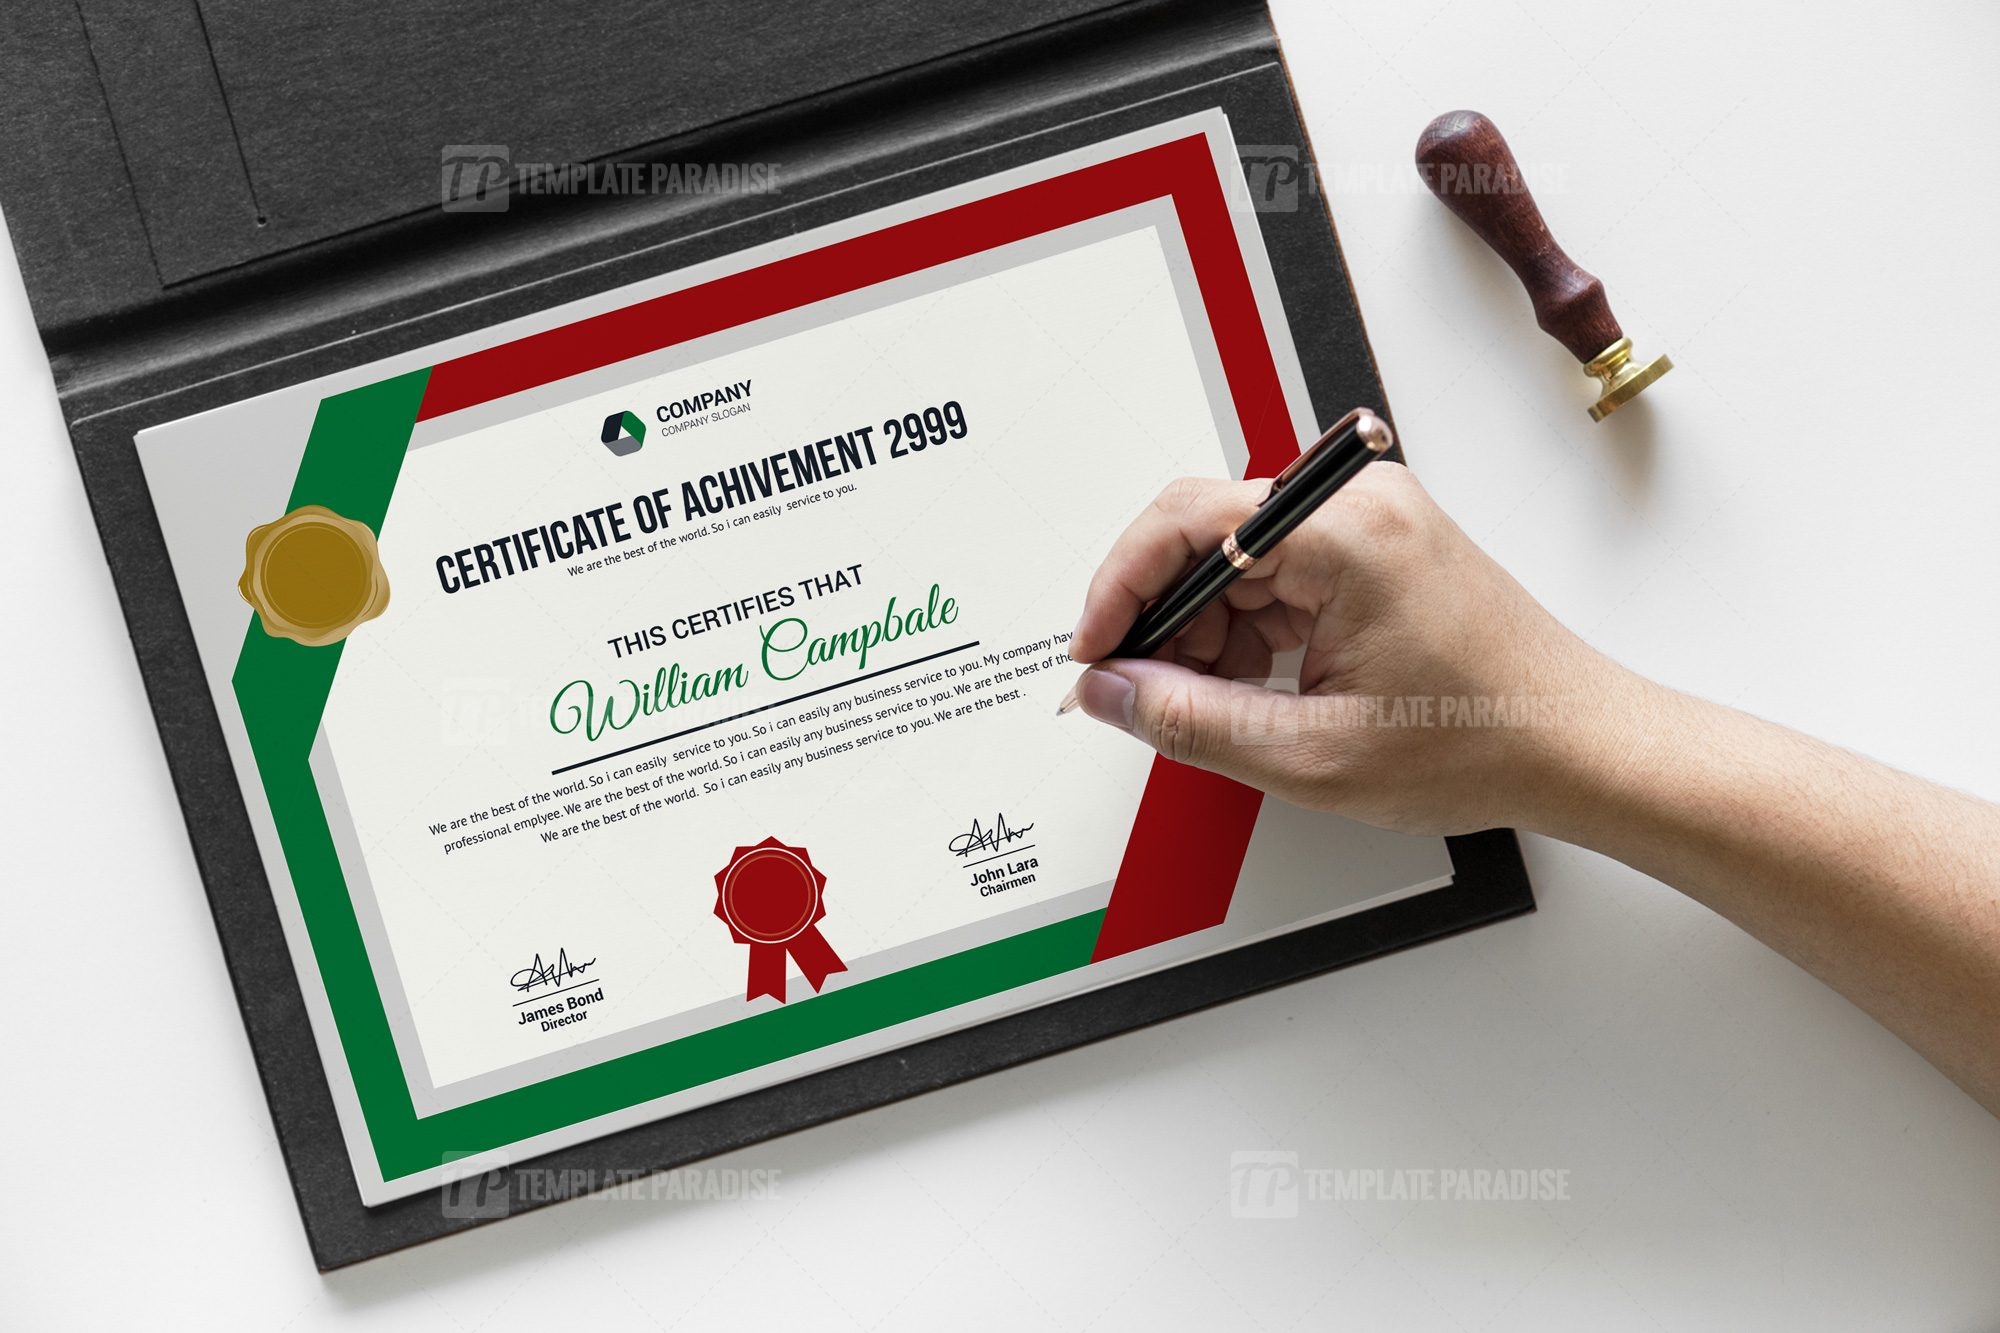 New Quality Certificate Template - Template Paradise  Graphic For Corporate Bond Certificate Template